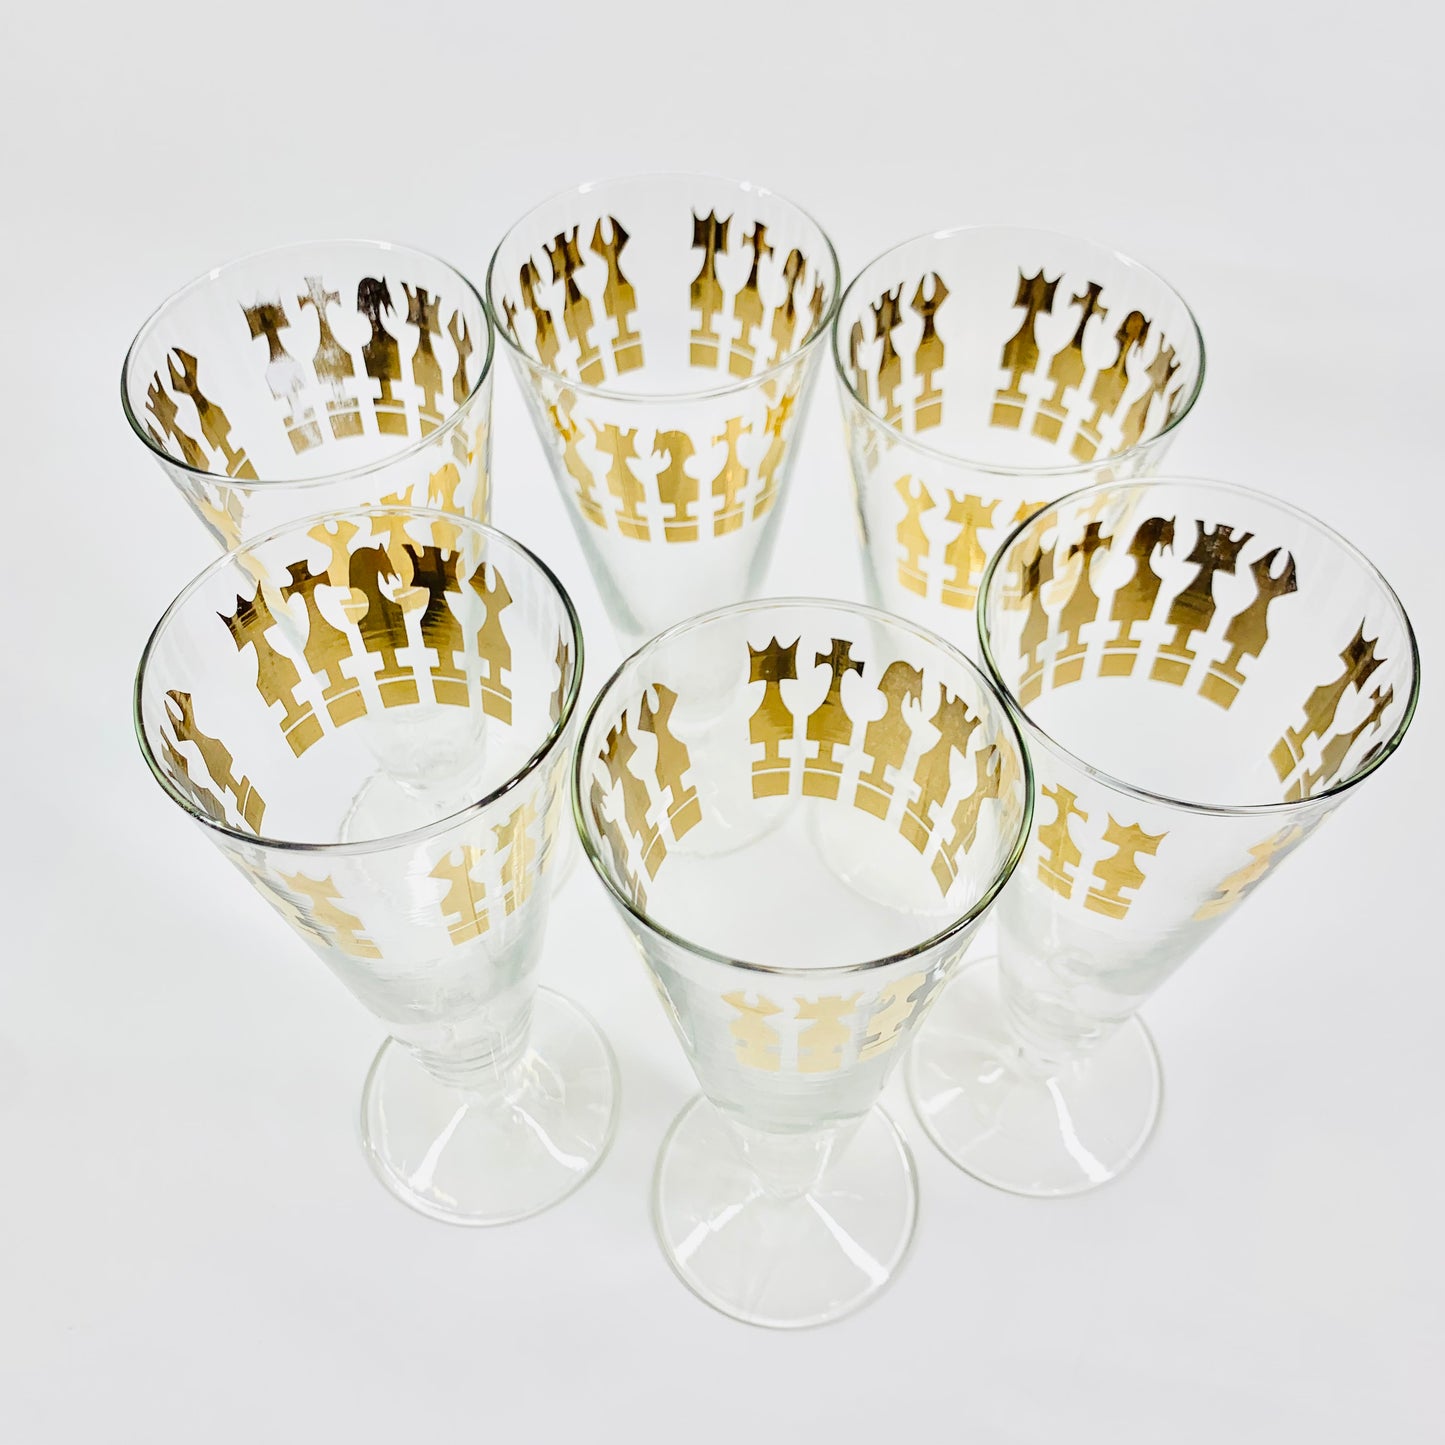 Extremely rare 1940s gold gilding clear glass champagne flutes with chess pattern